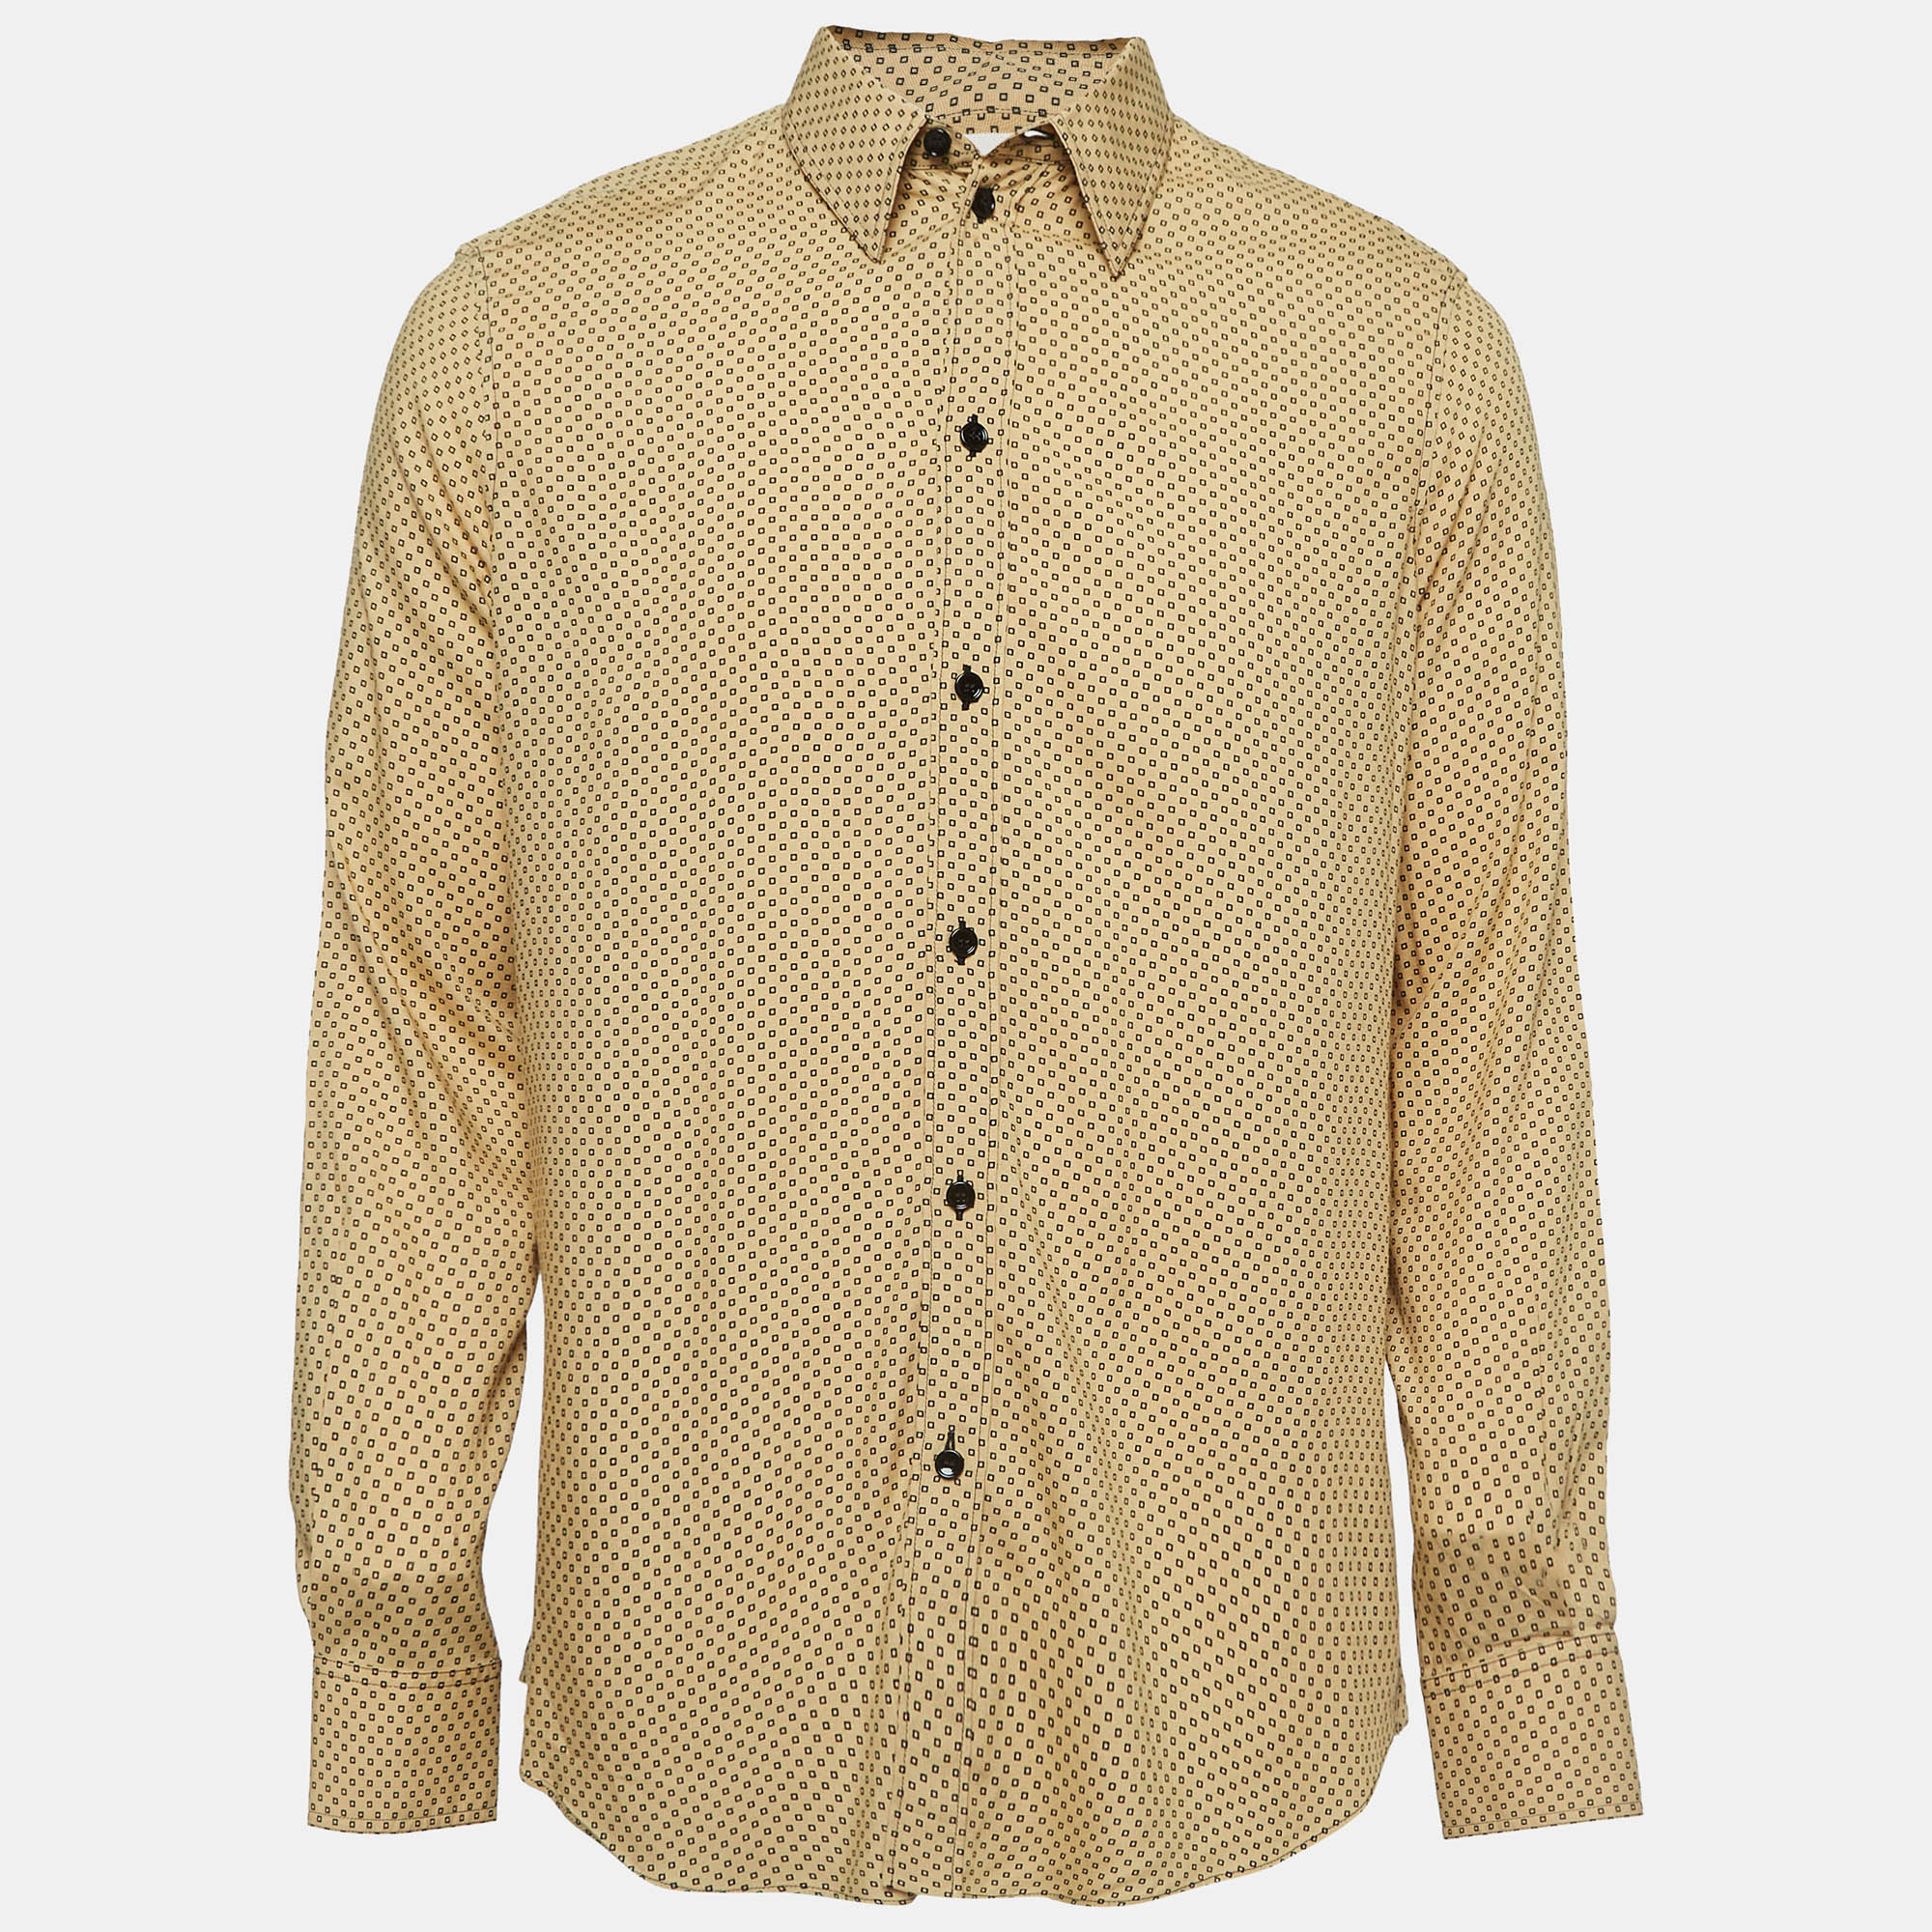 Celine yellow square printed crepe buttoned shirt l